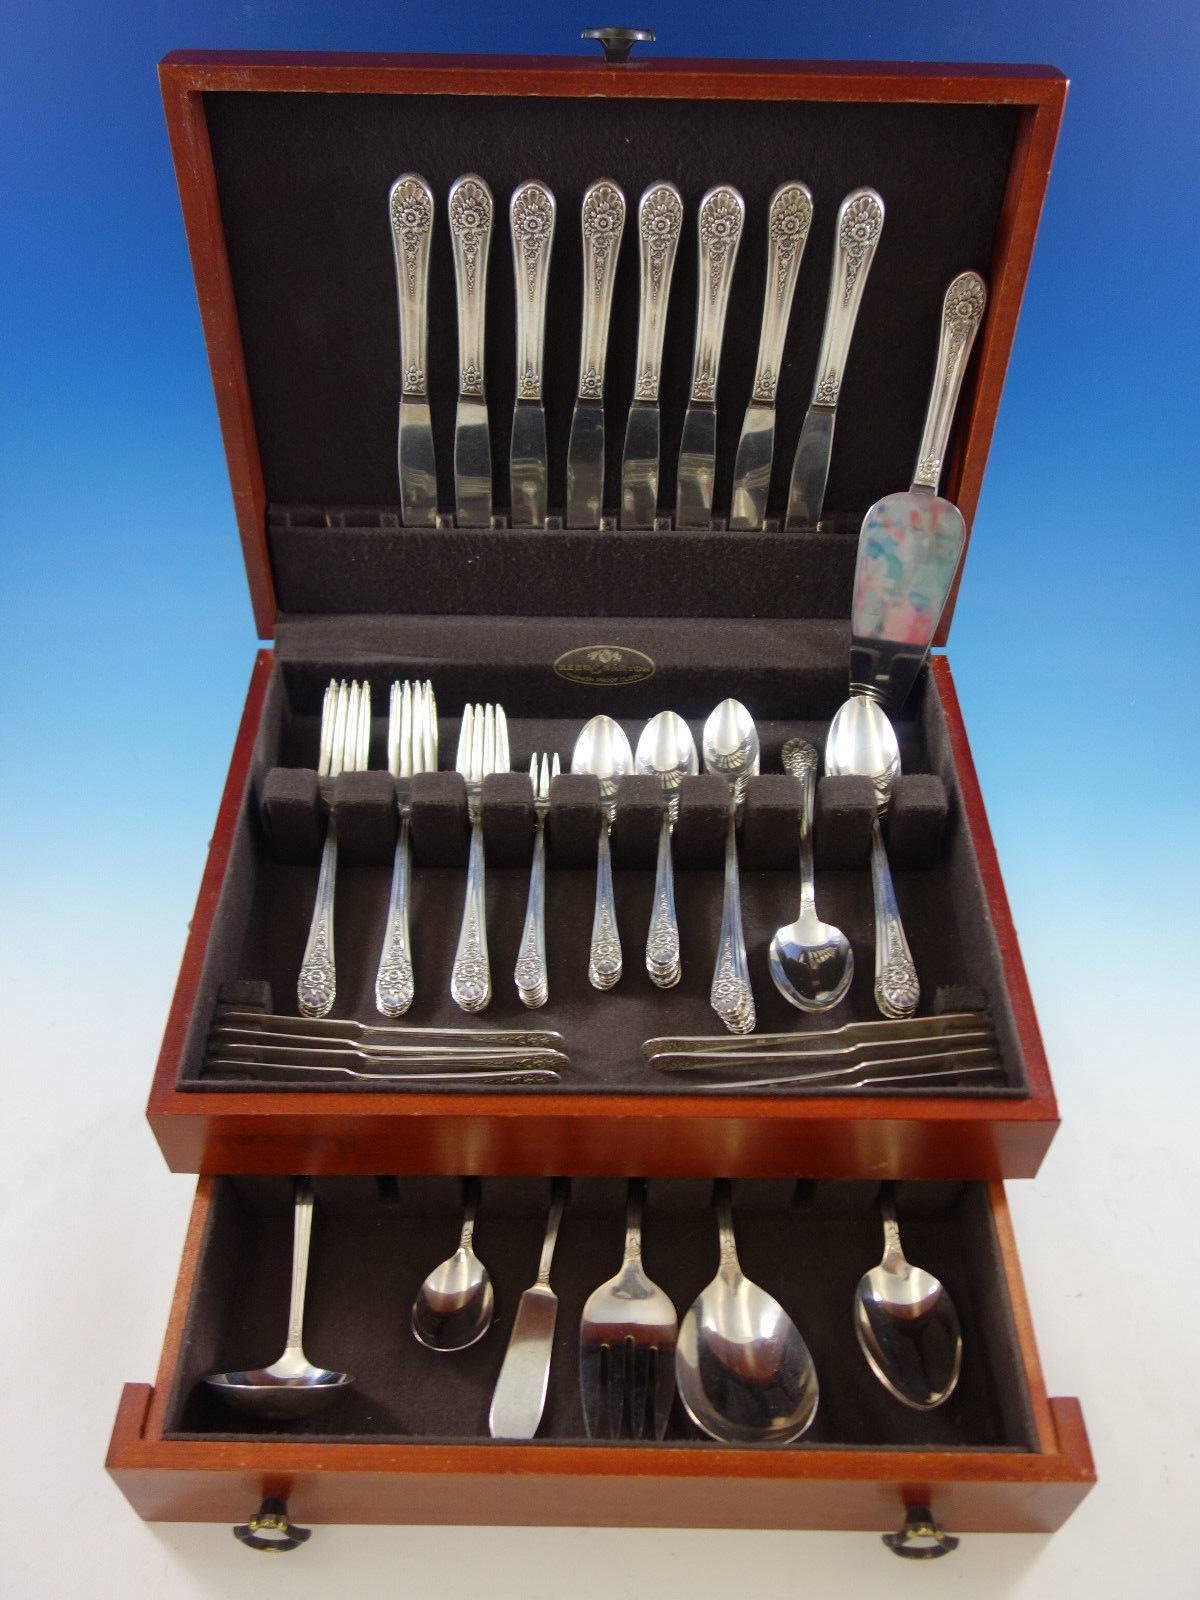 Jubilee by Wm. Rogers Silverplated Flatware set, 80 pieces. This set includes: 

Eight knives, 9 1/4